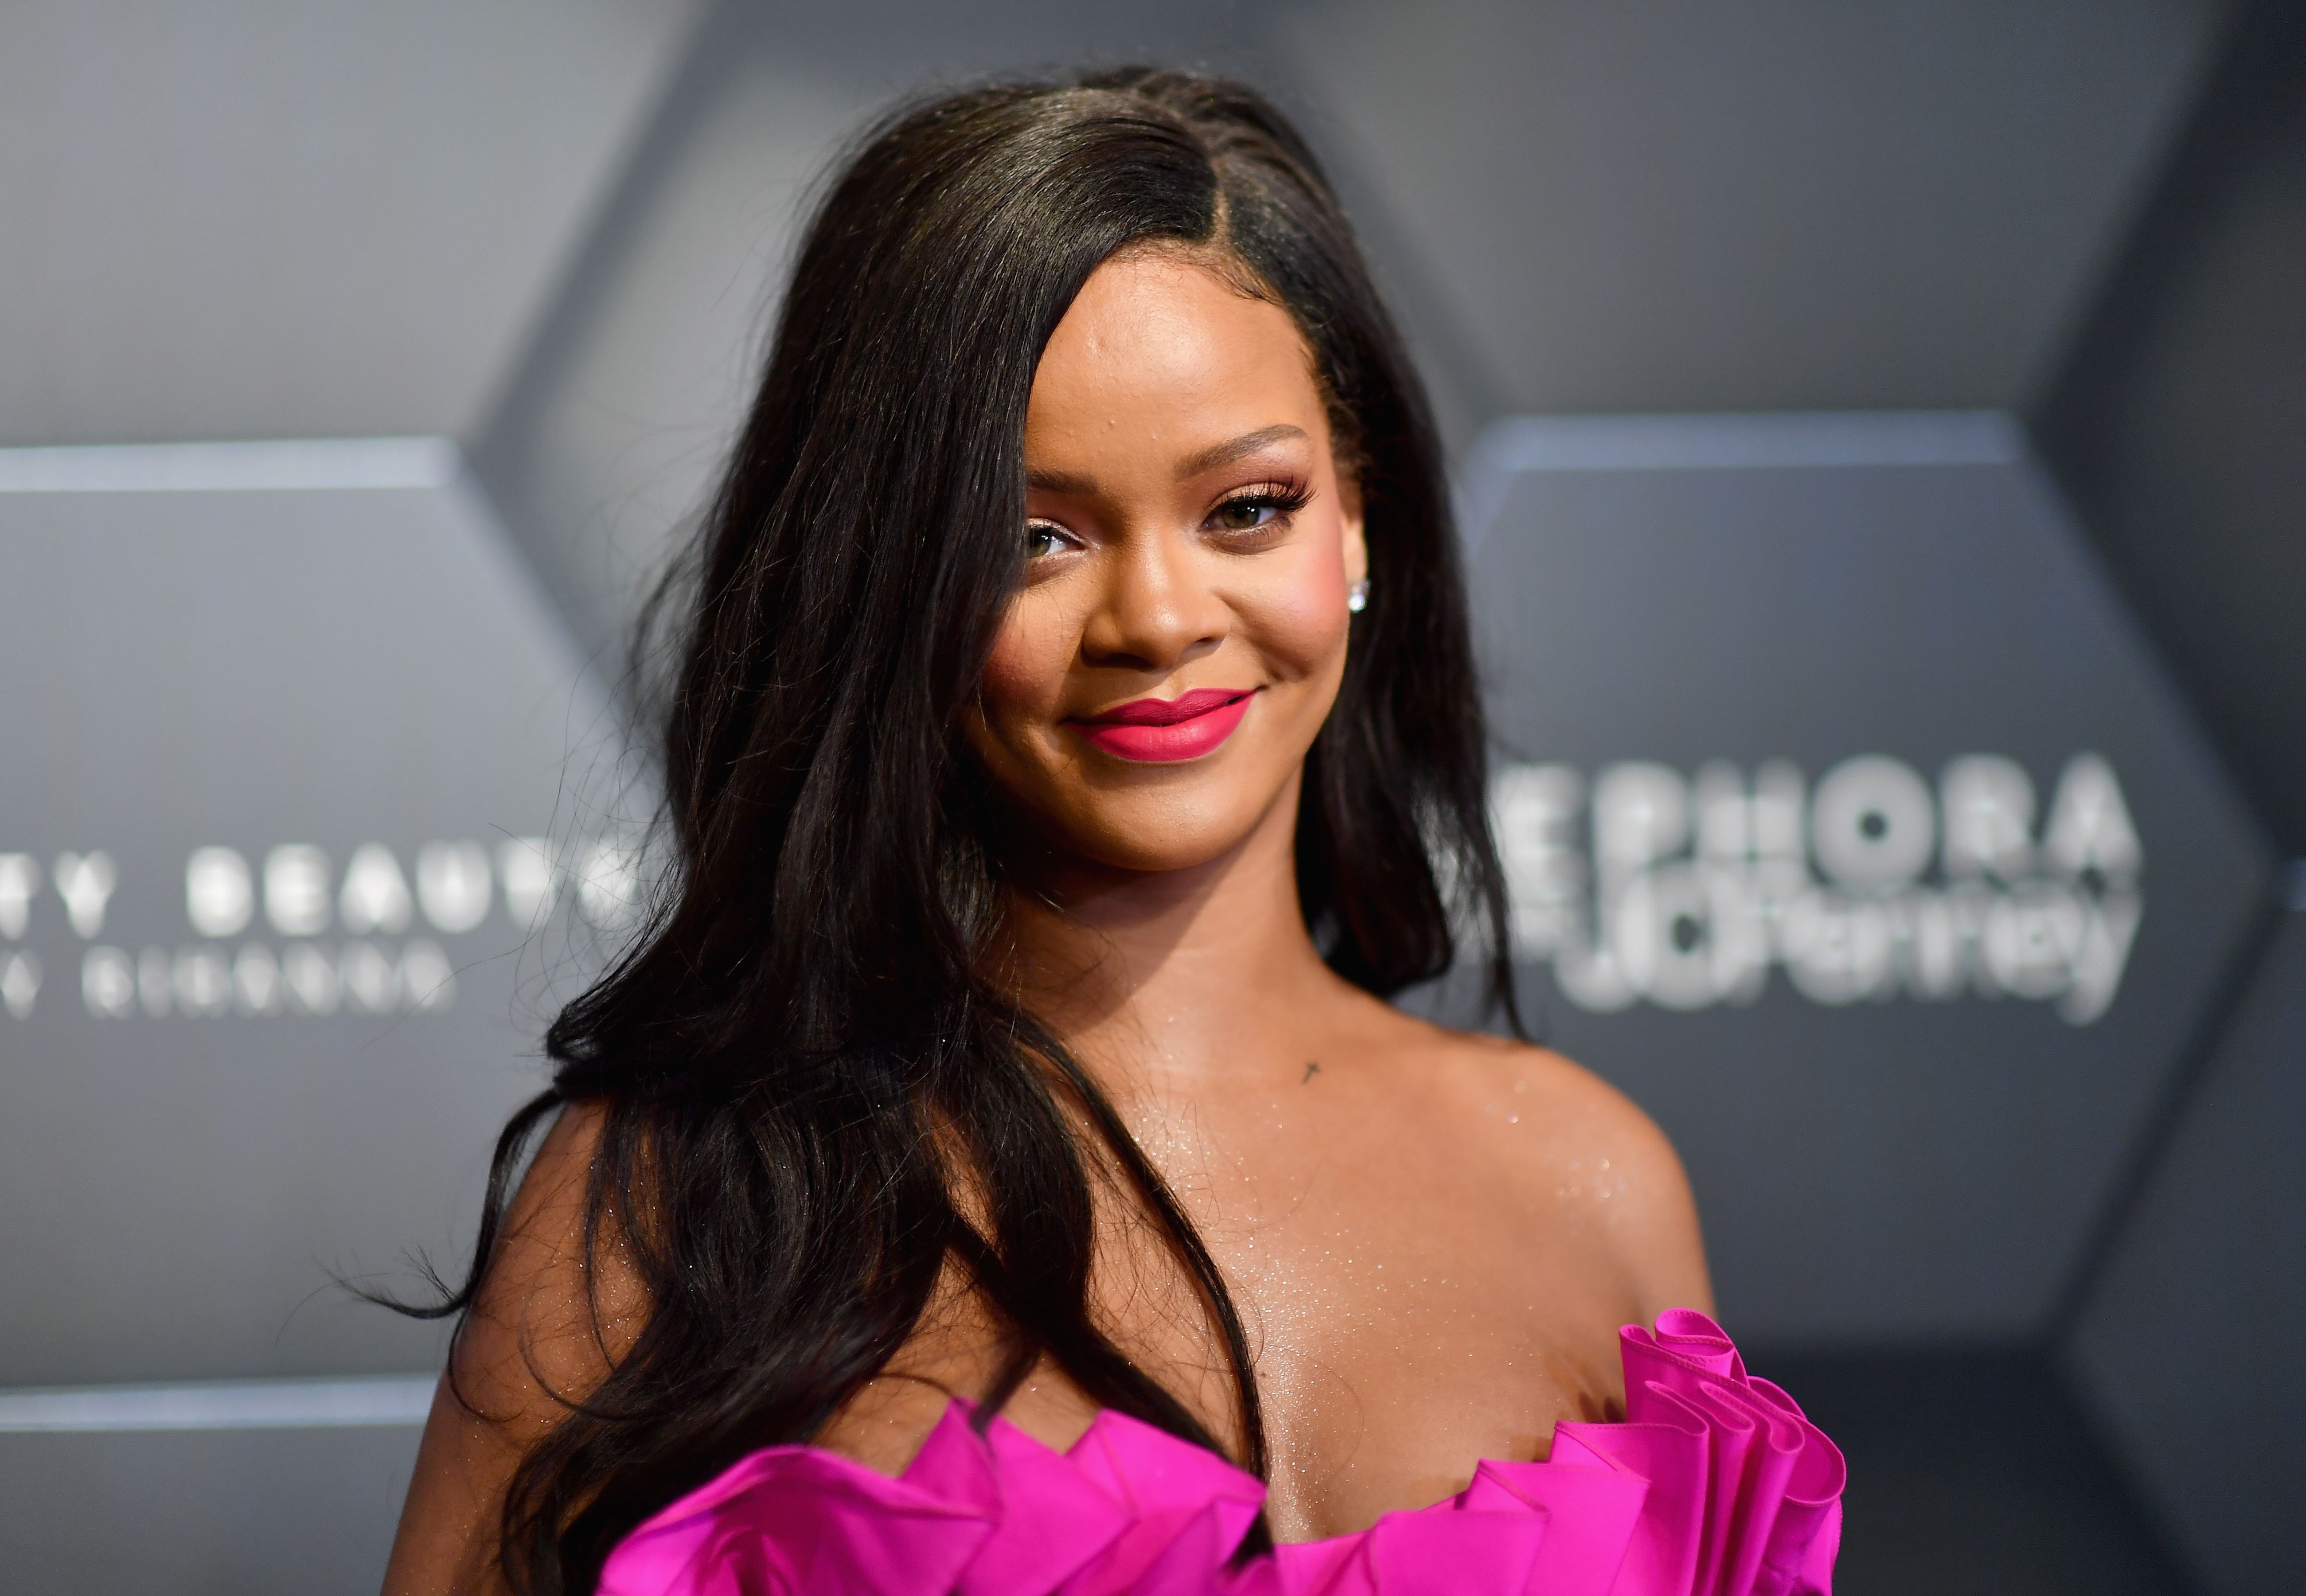 Tencent Music’s platforms are becoming important vehicles for US pop stars such as Rihanna to reach a Chinese audience. Photo: AFP